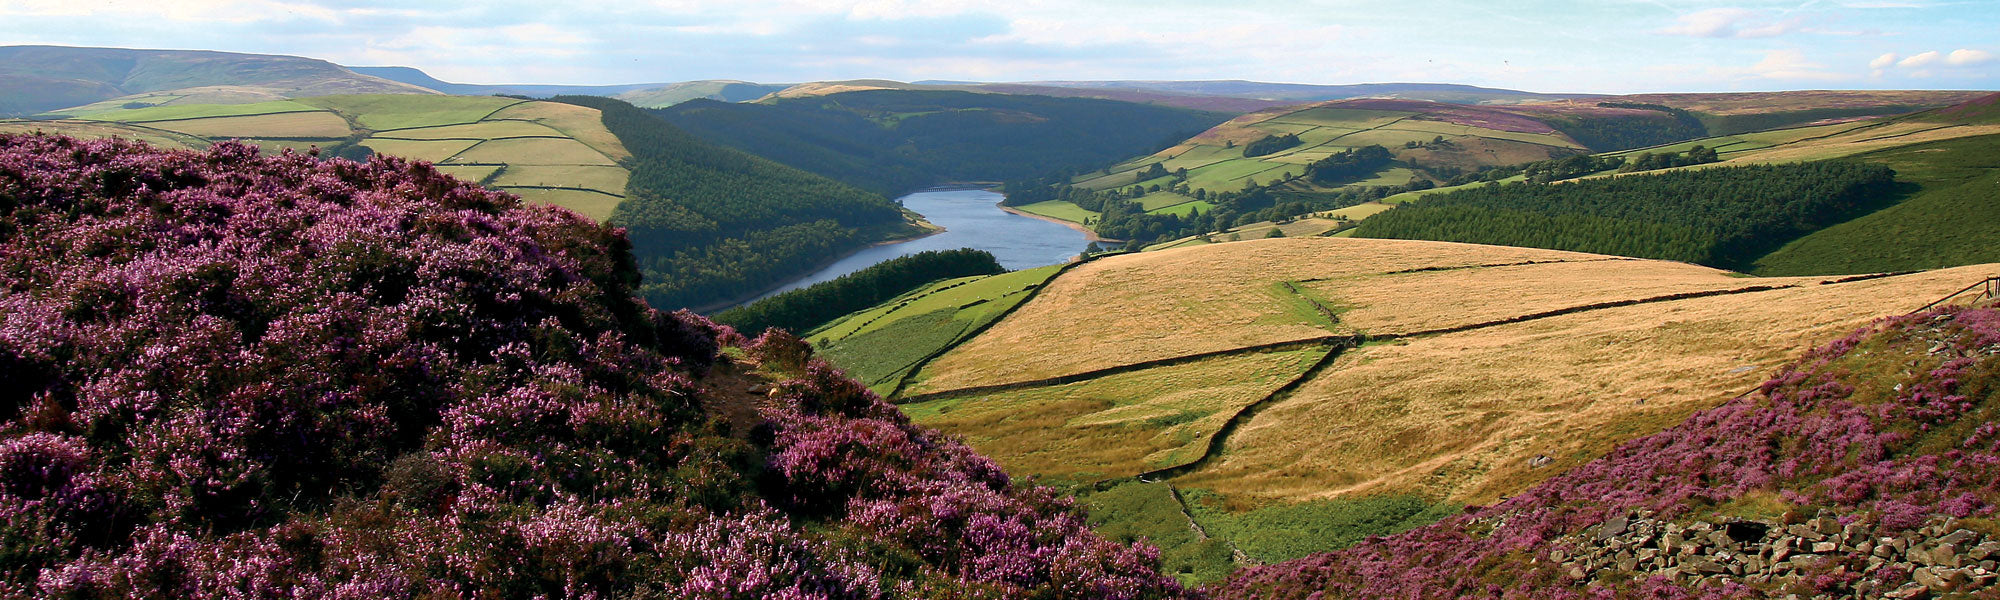 Ladybower reservoir, as seen from the Derwent Edges, taken from Day Walks in the Peak District guidebook